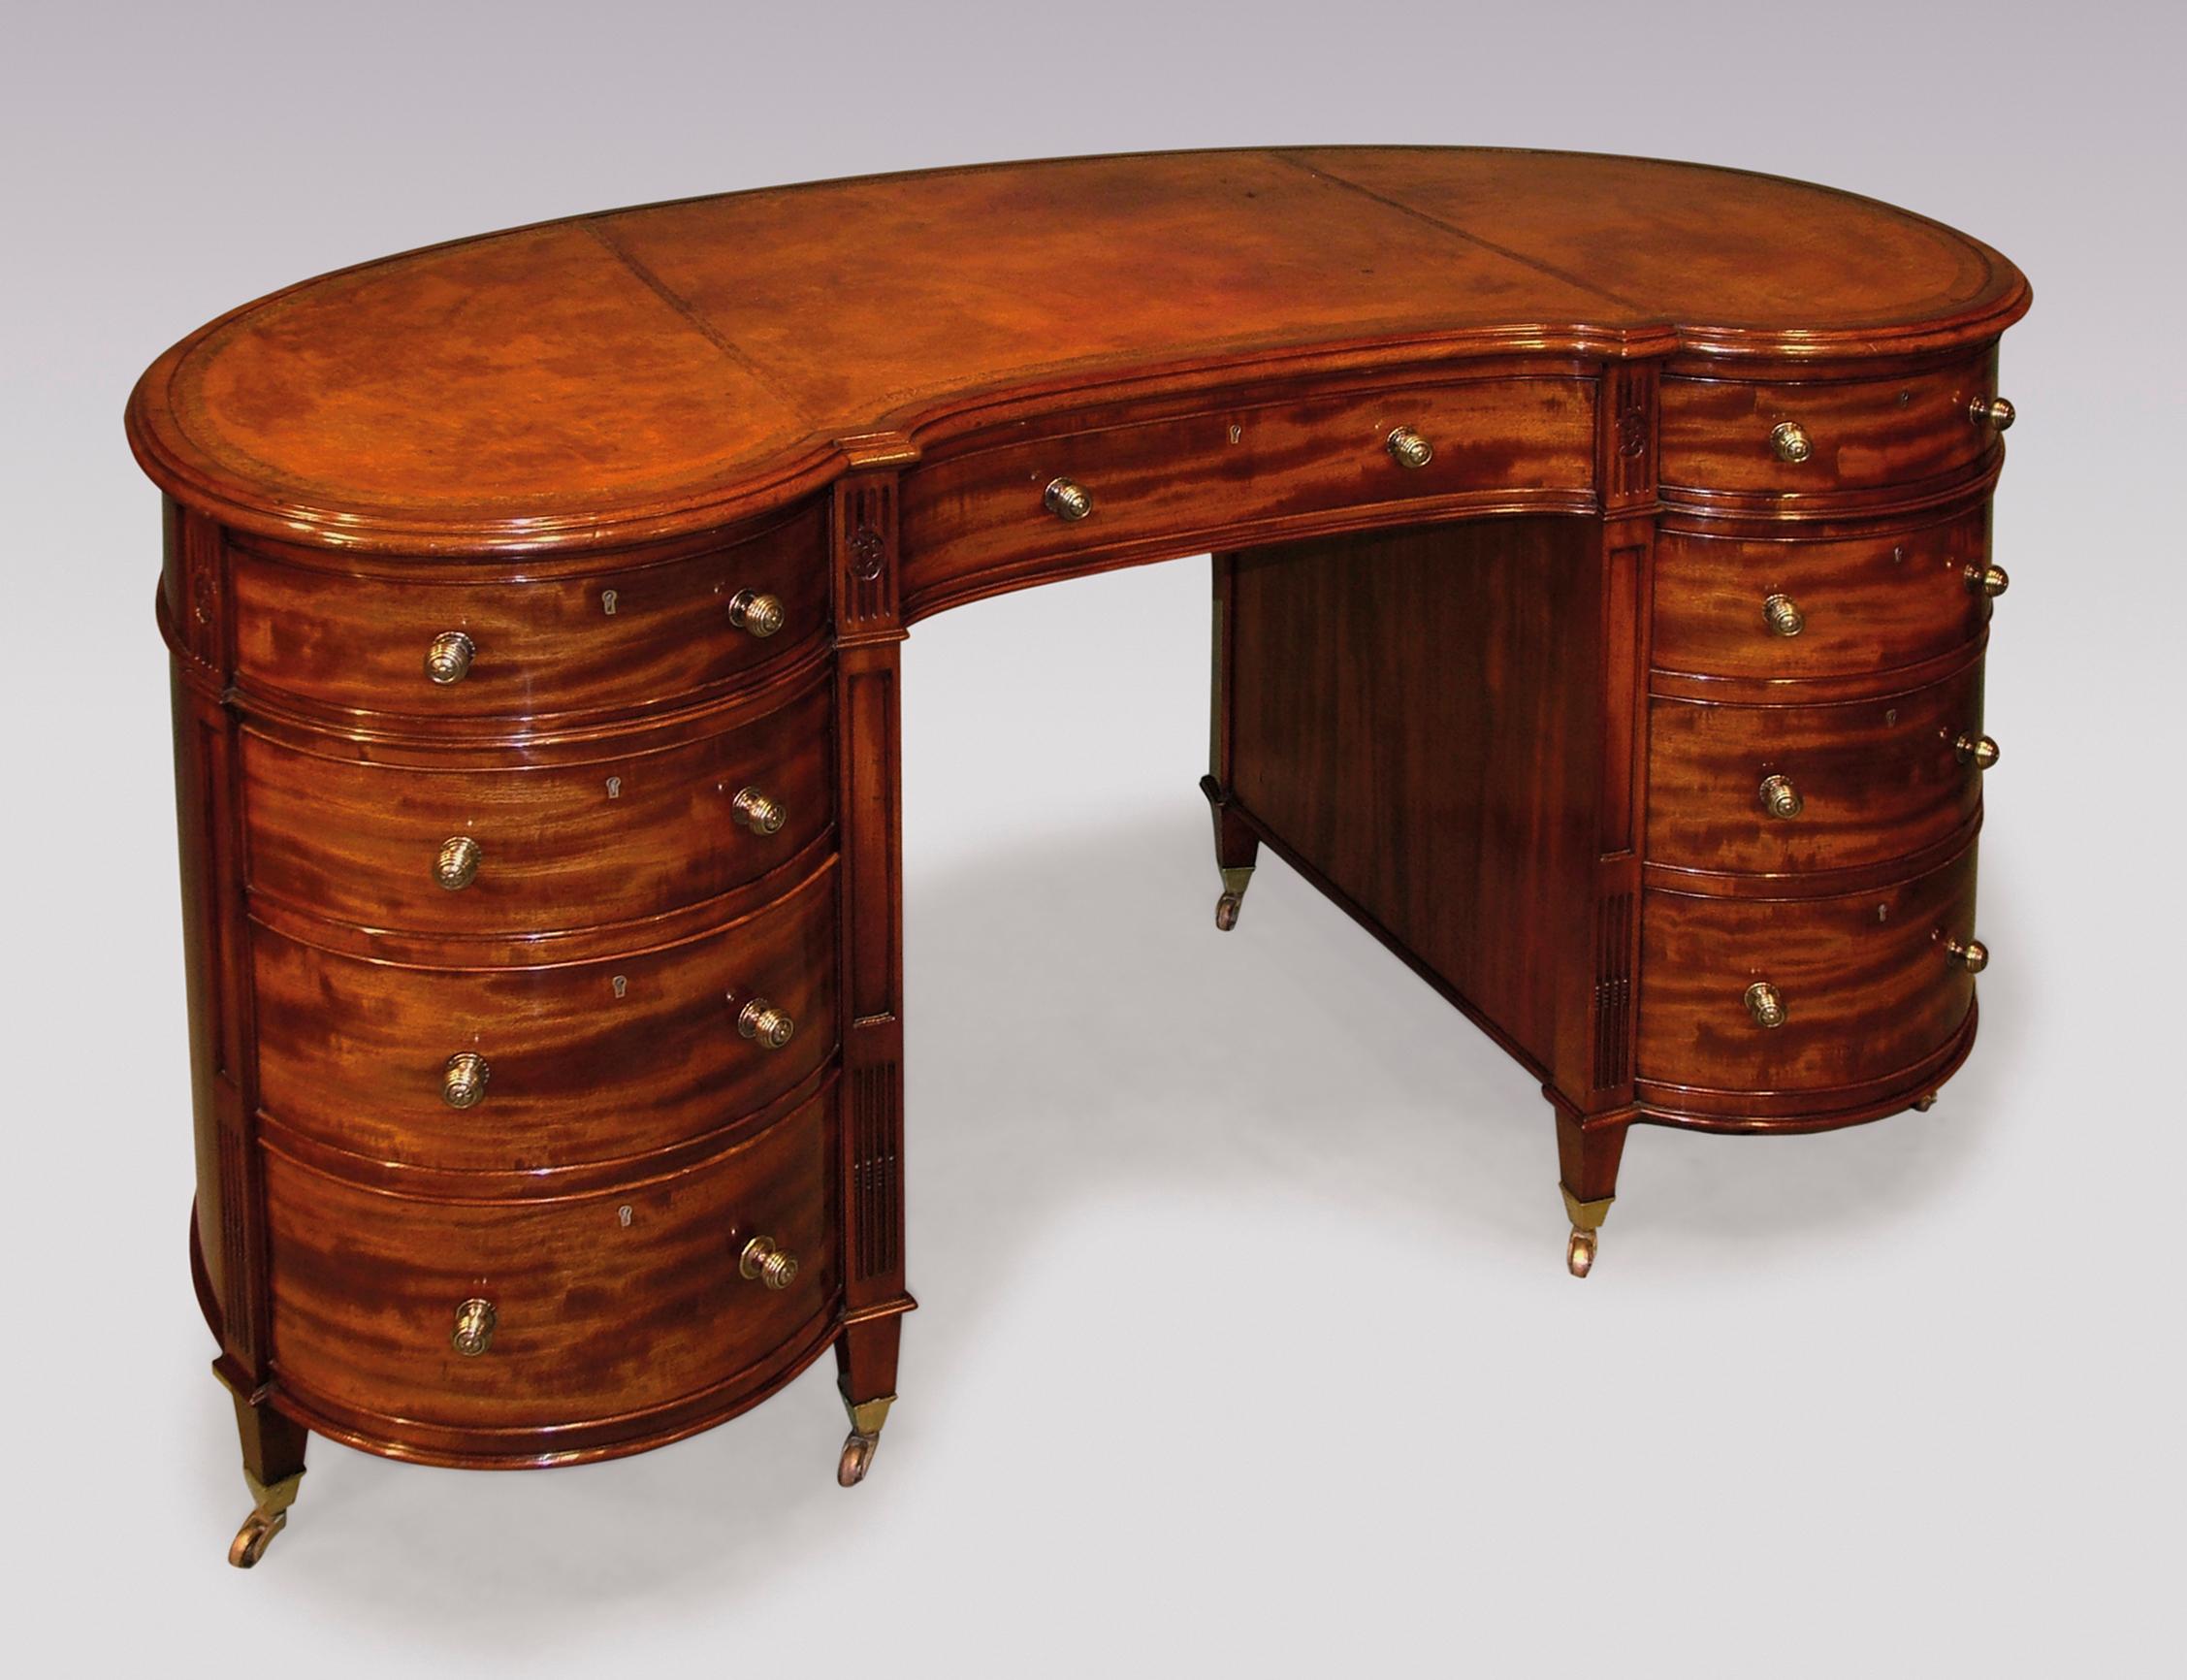 A fine quality mid-19th century well figured mahogany kidney shaped pedestal desk, having moulded edge gilt tooled leather top, above graduated drawers flanked by reeded and panelled columns with carved paterae, supported on short square tapering